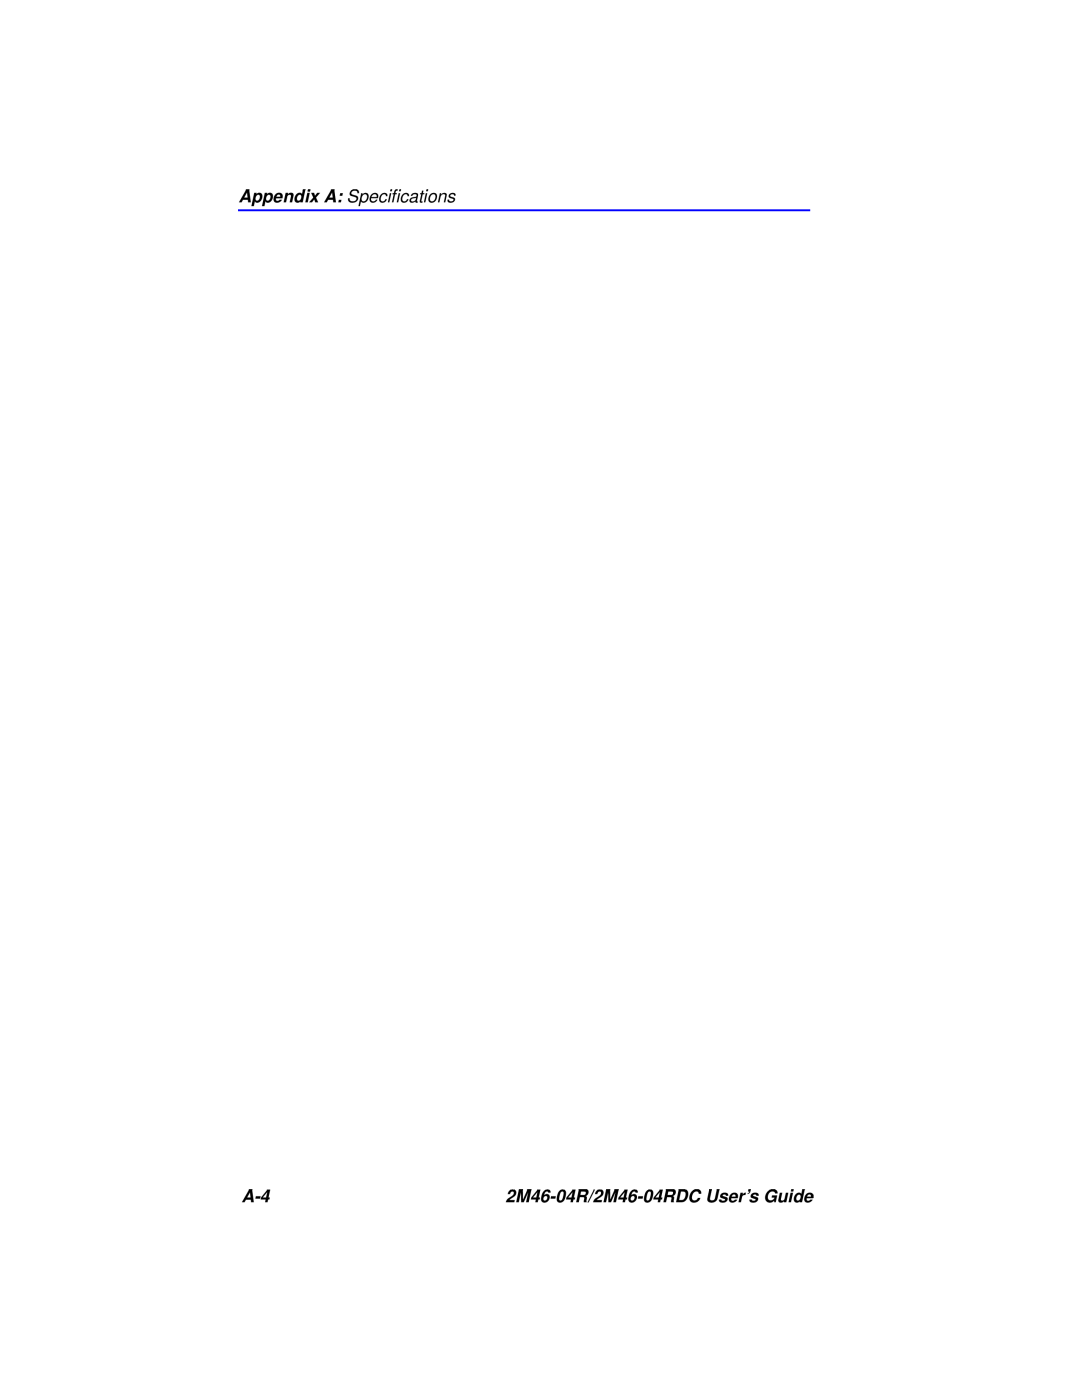 Cabletron Systems pmn manual Appendix A Speciﬁcations, 2M46-04R/2M46-04RDC User’s Guide 